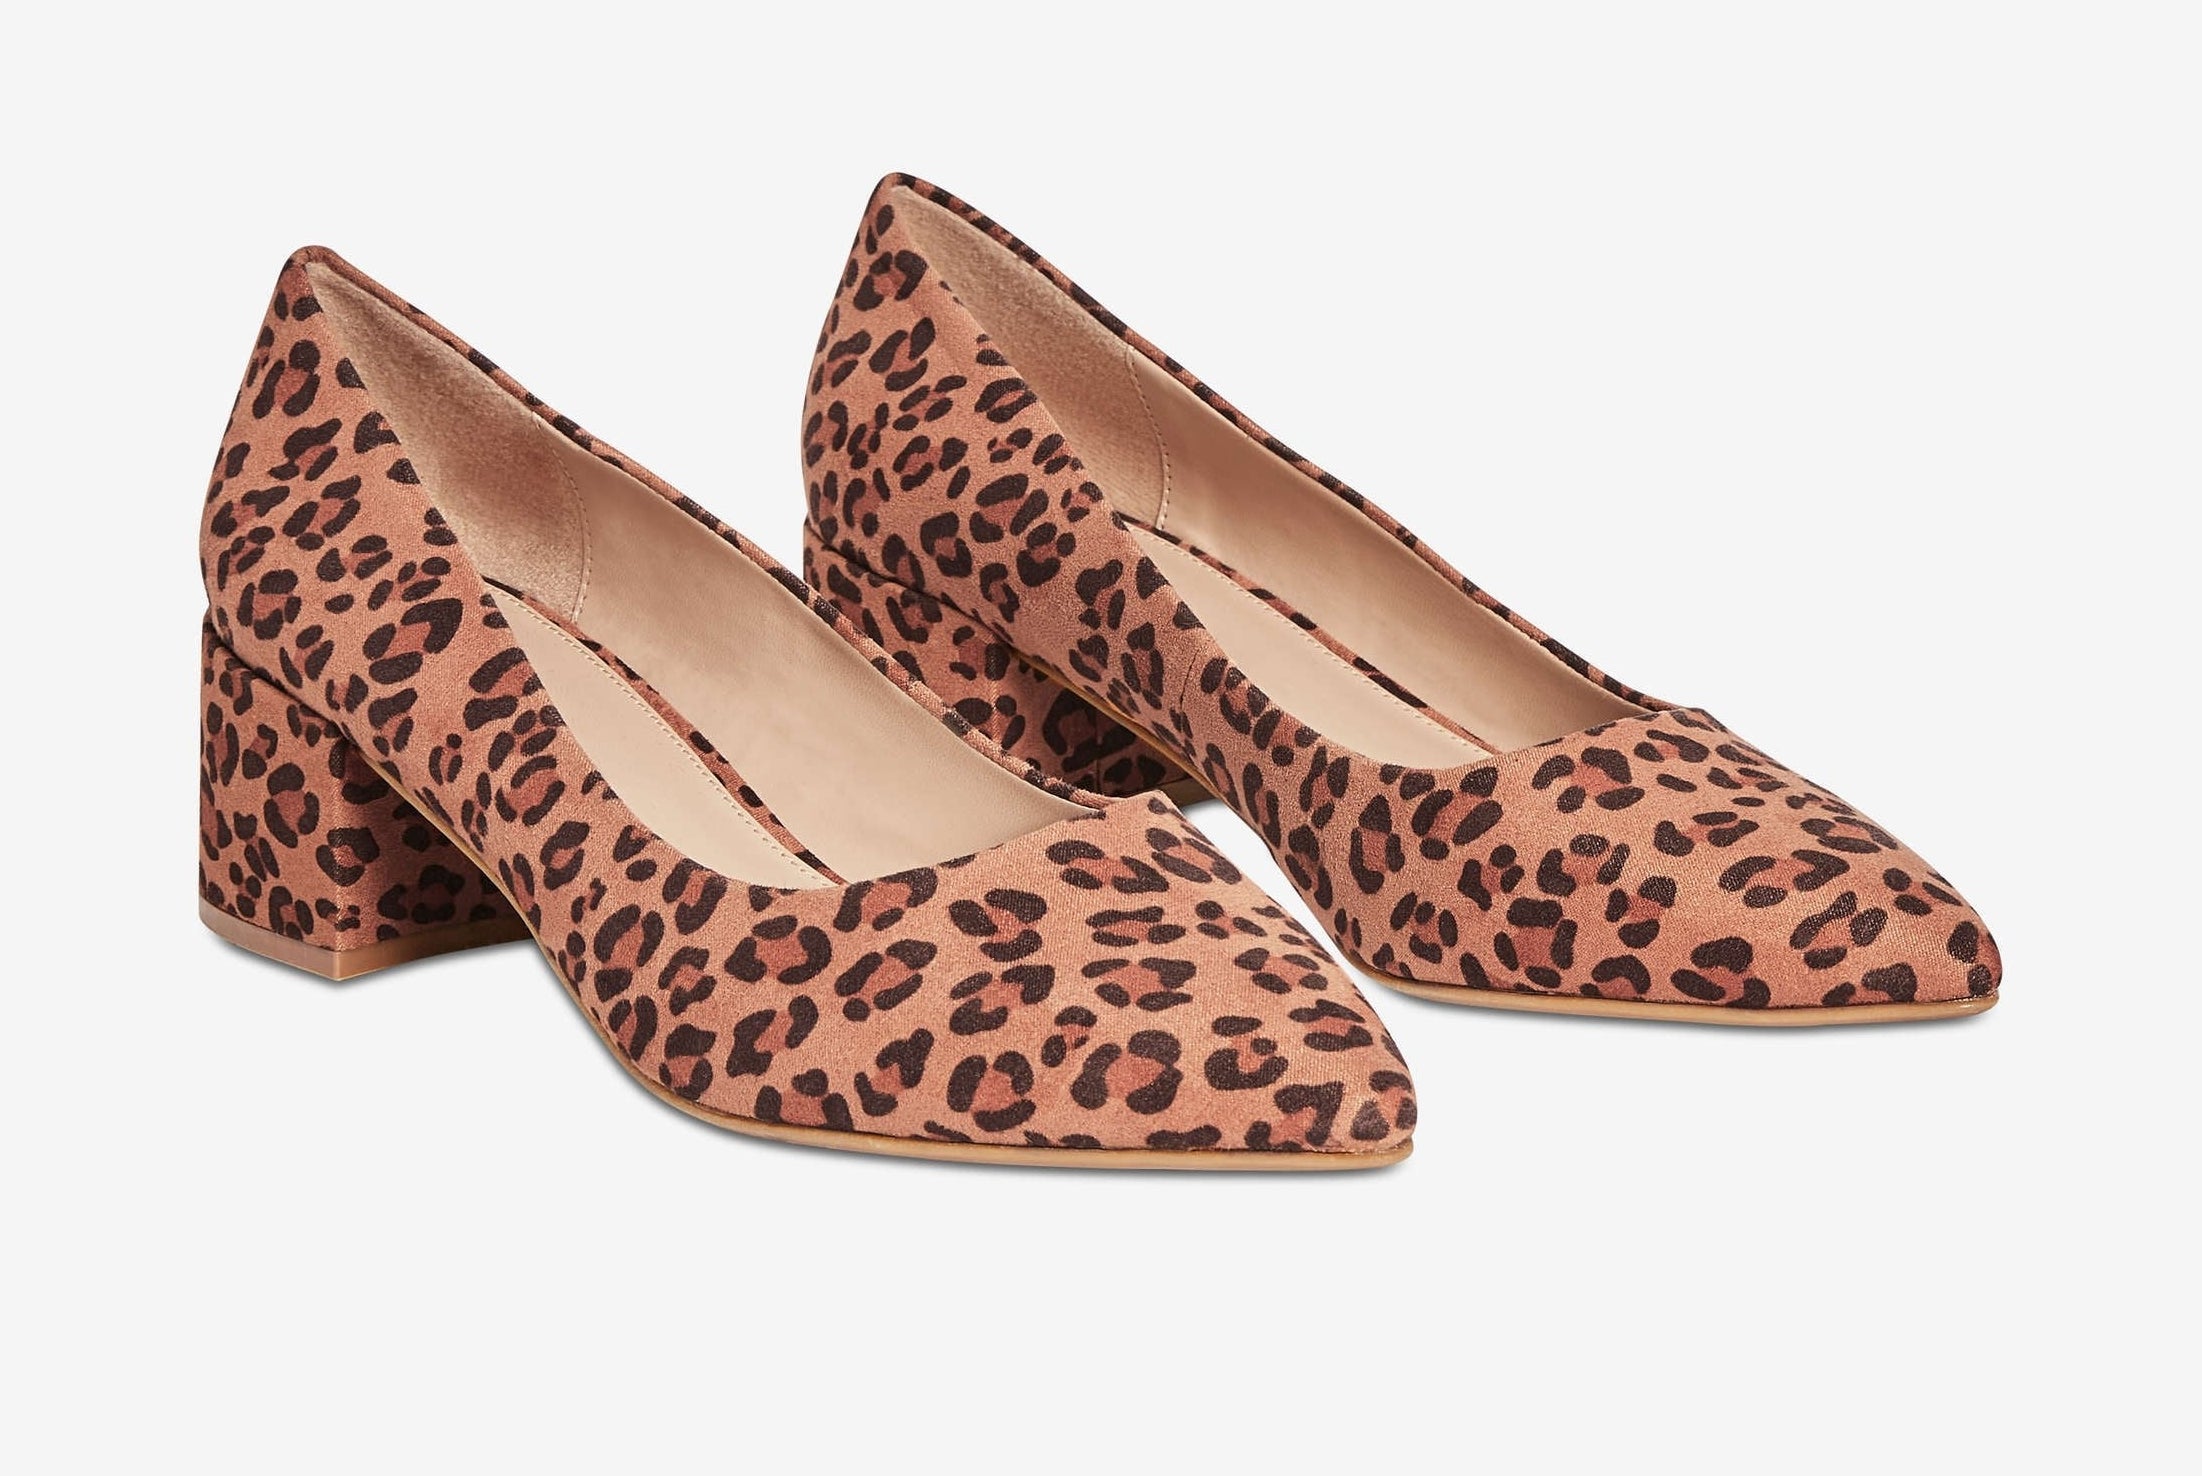 A pair of low heels with a leopard print